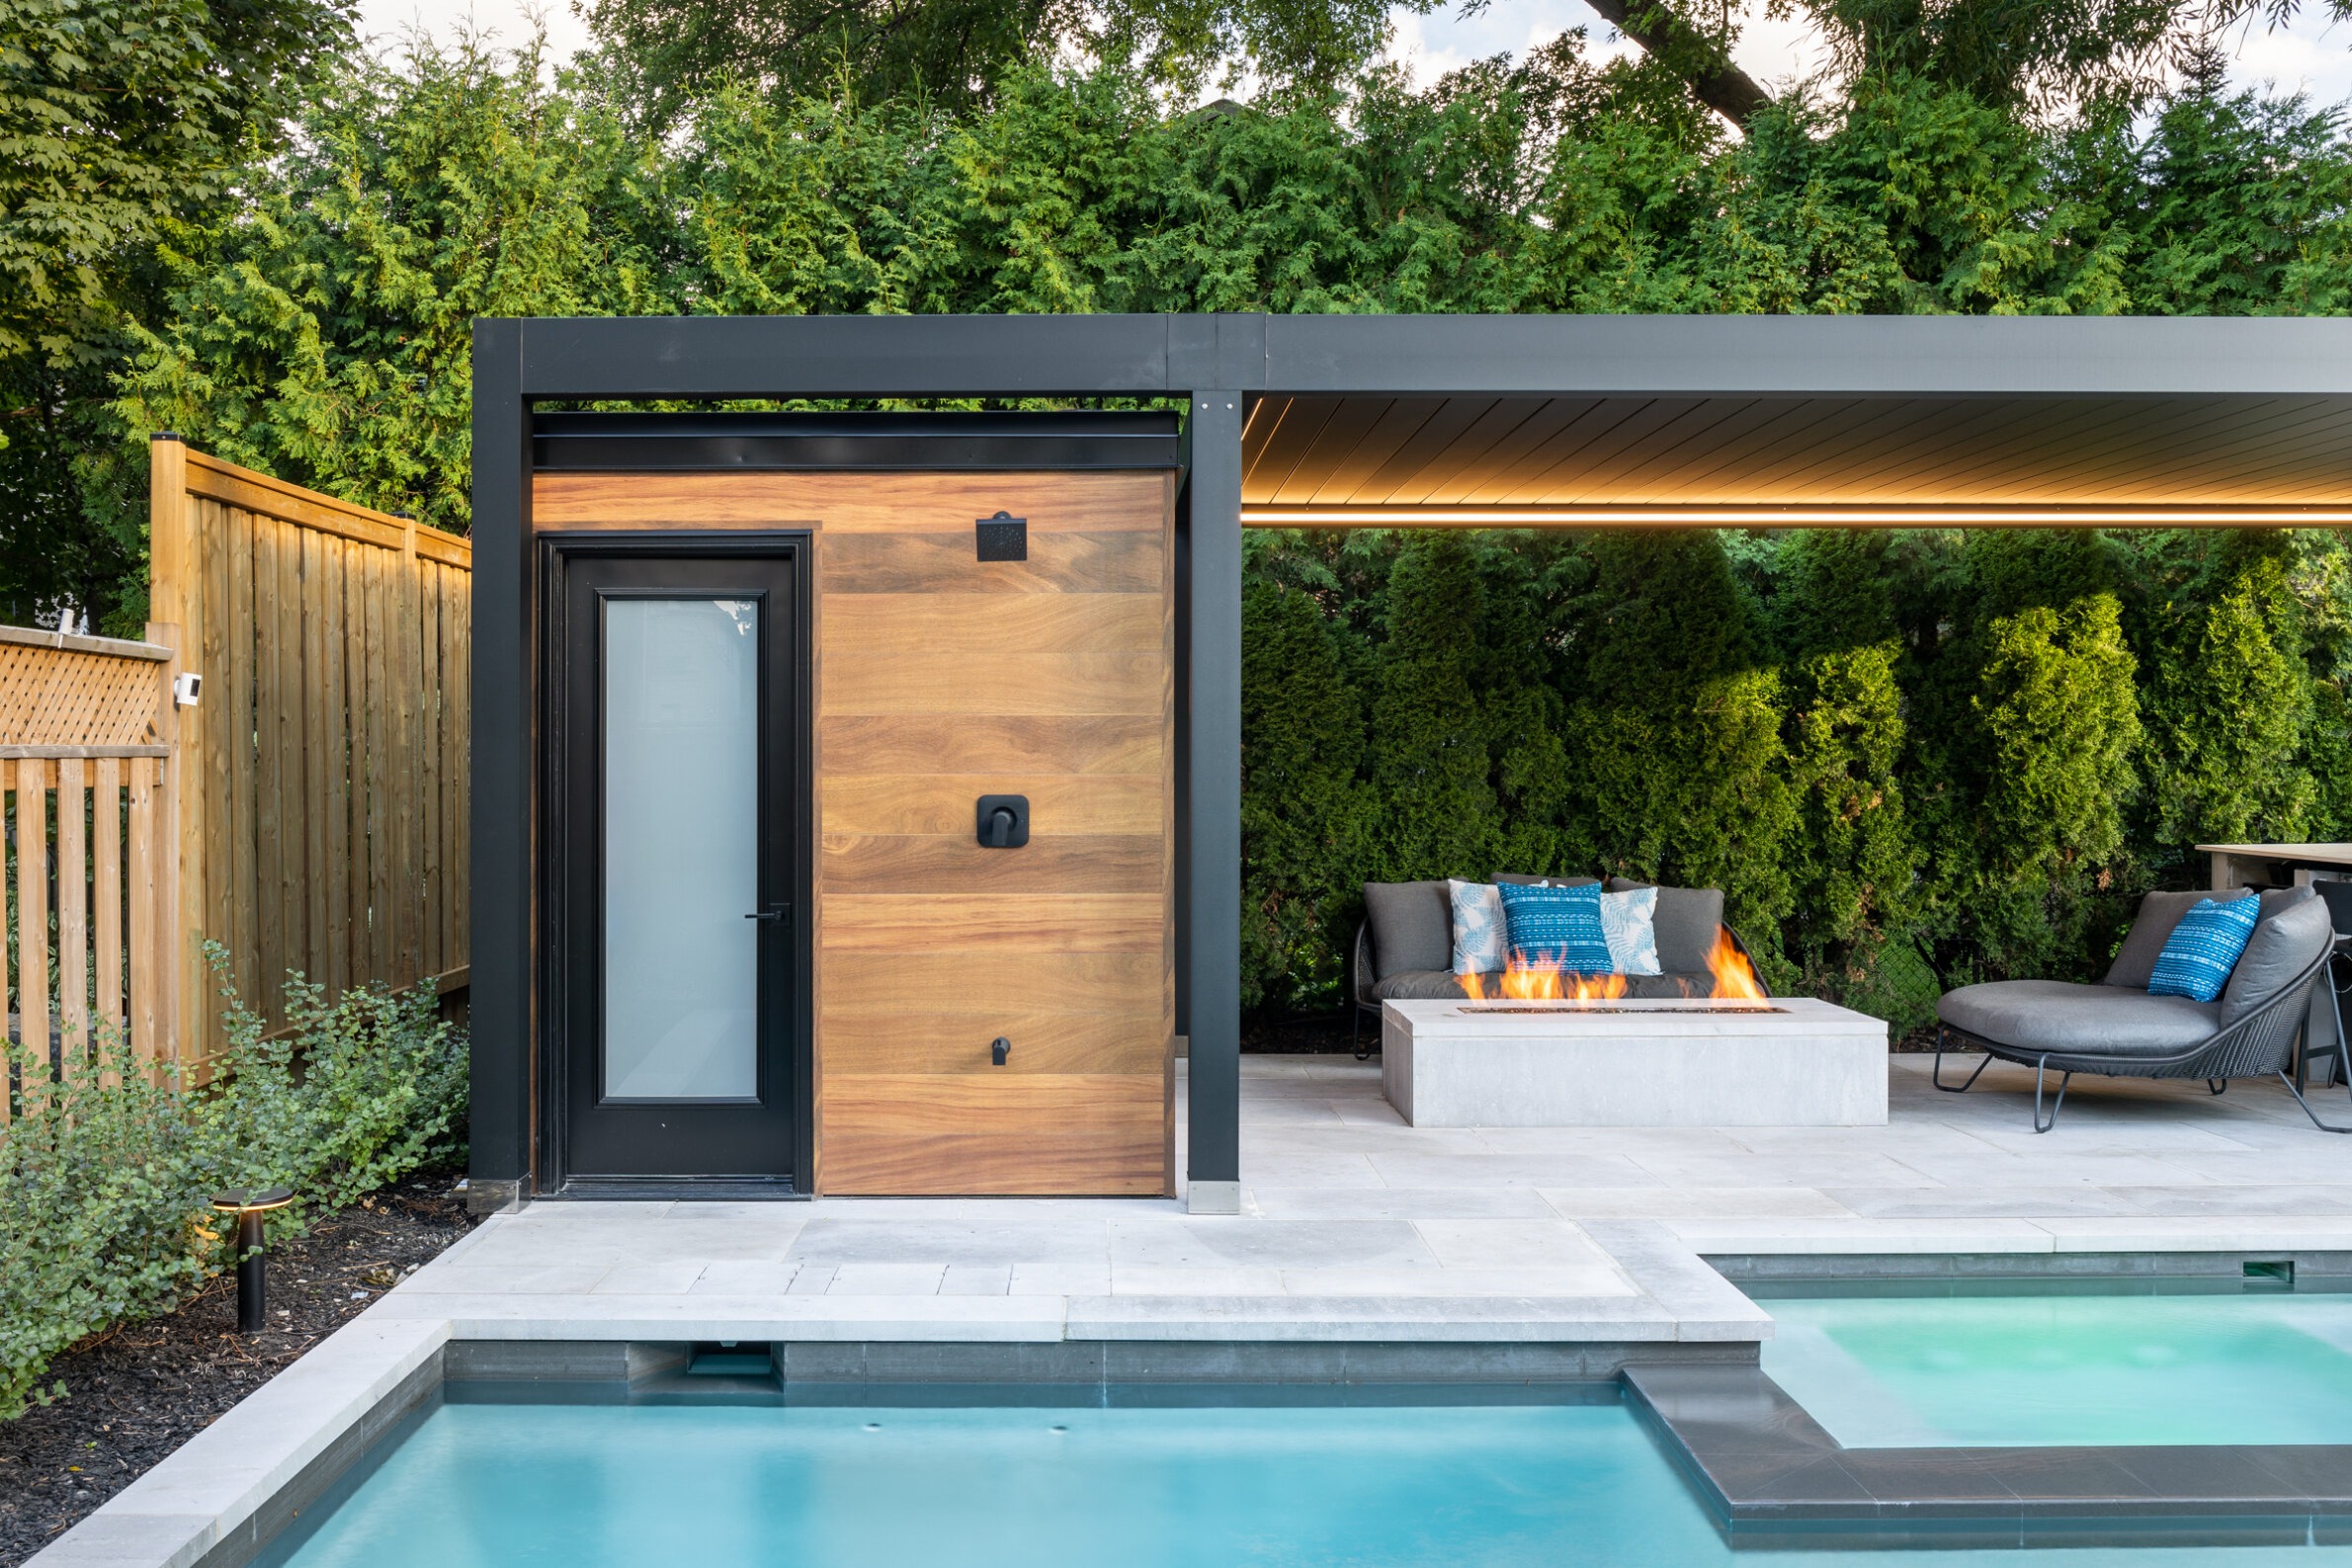 Modern backyard with a swimming pool, stylish wooden outbuilding door, outdoor fireplace, comfortable seating, and lush green privacy hedge.